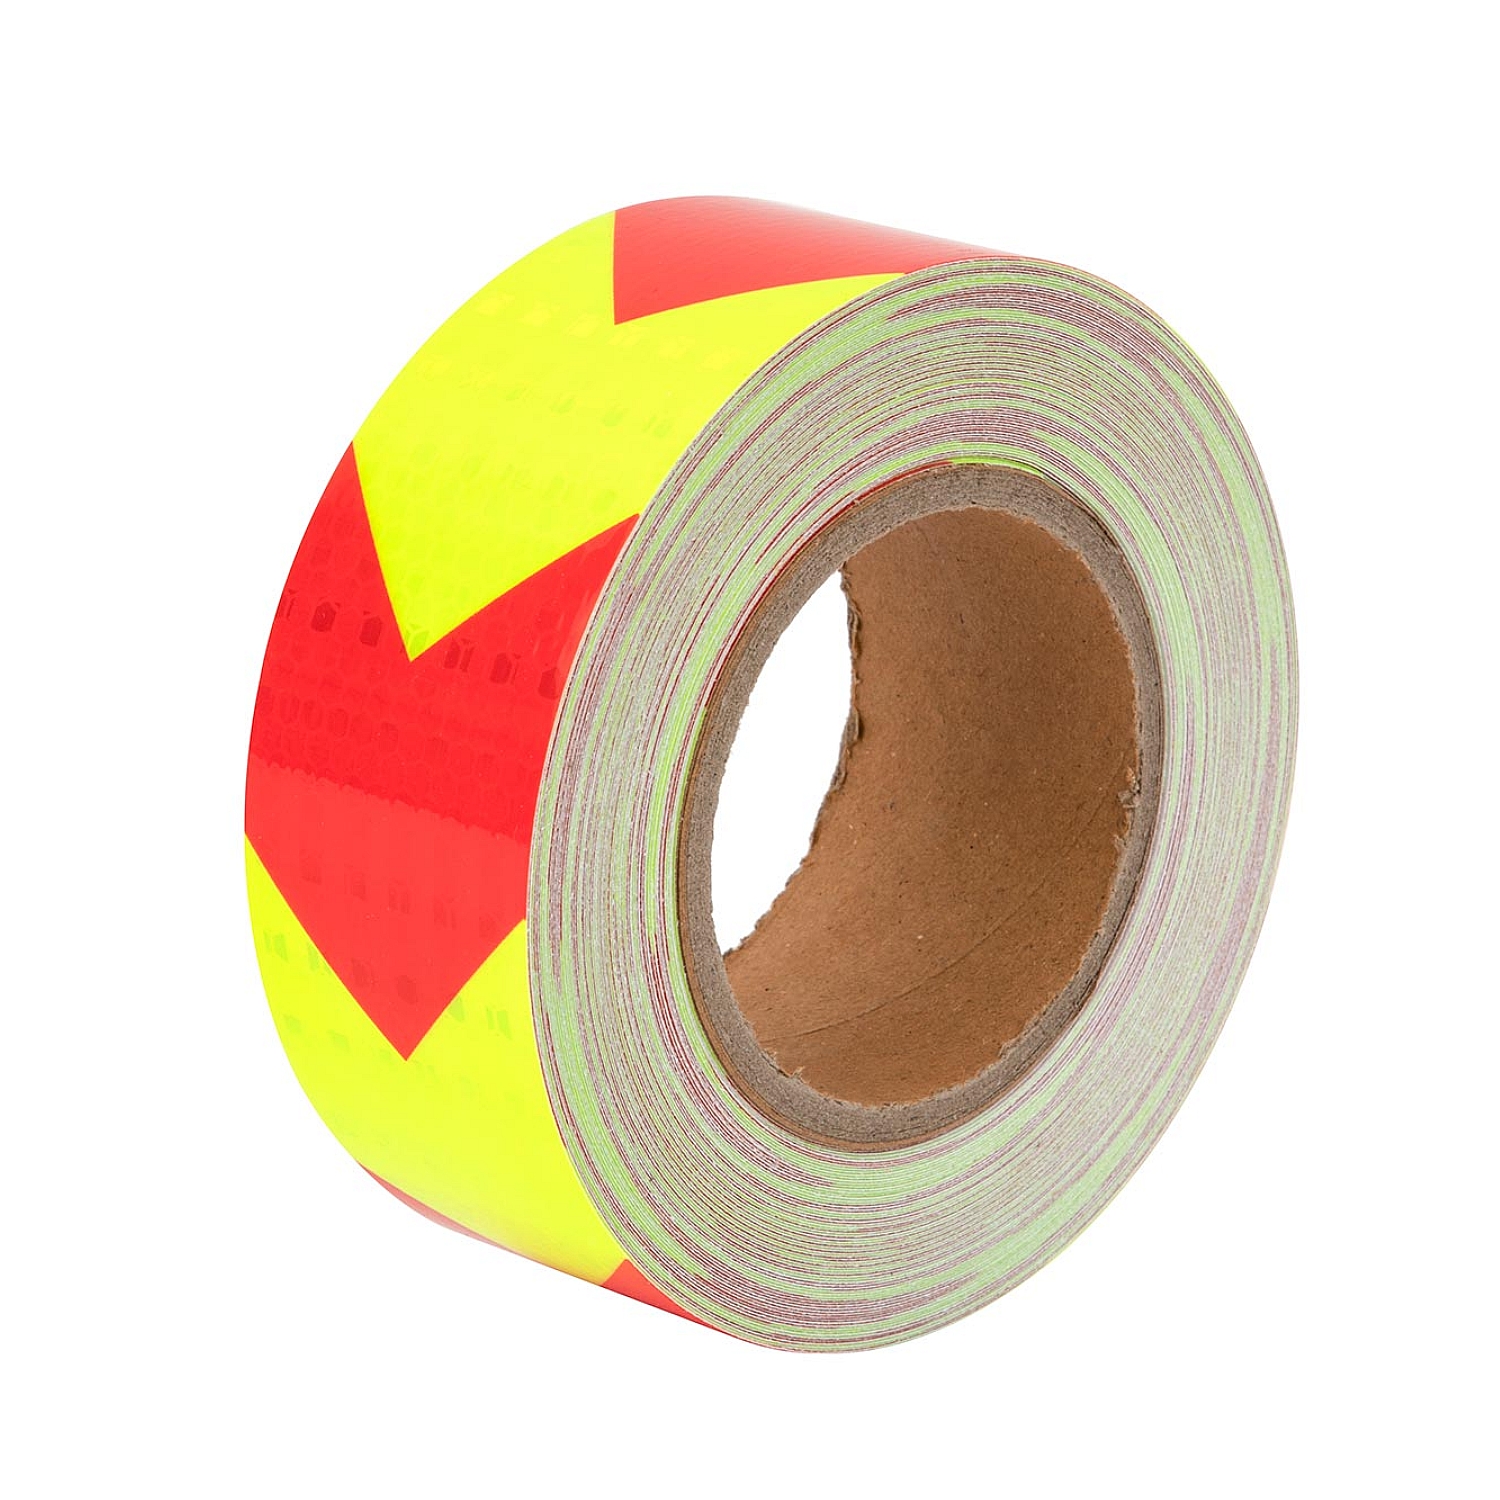 Waterproof Self-Adhesive PVC Arrow Reflective Safety Warning Tape for Trucks